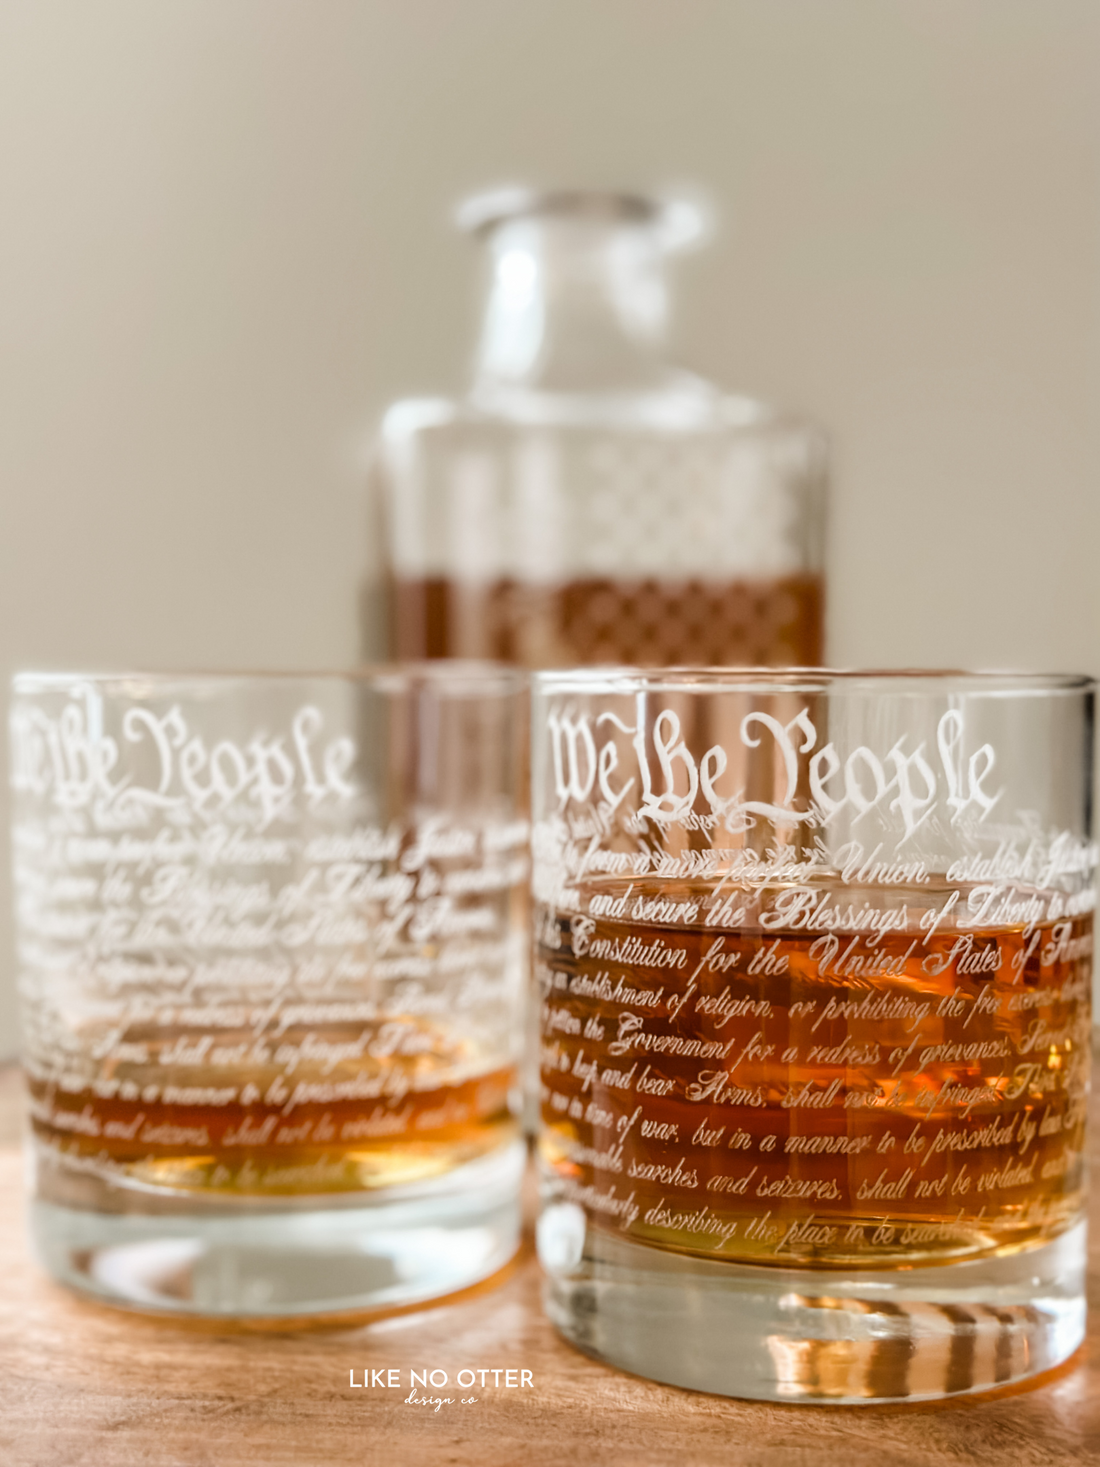 The Founder - Engraved Decanter Set